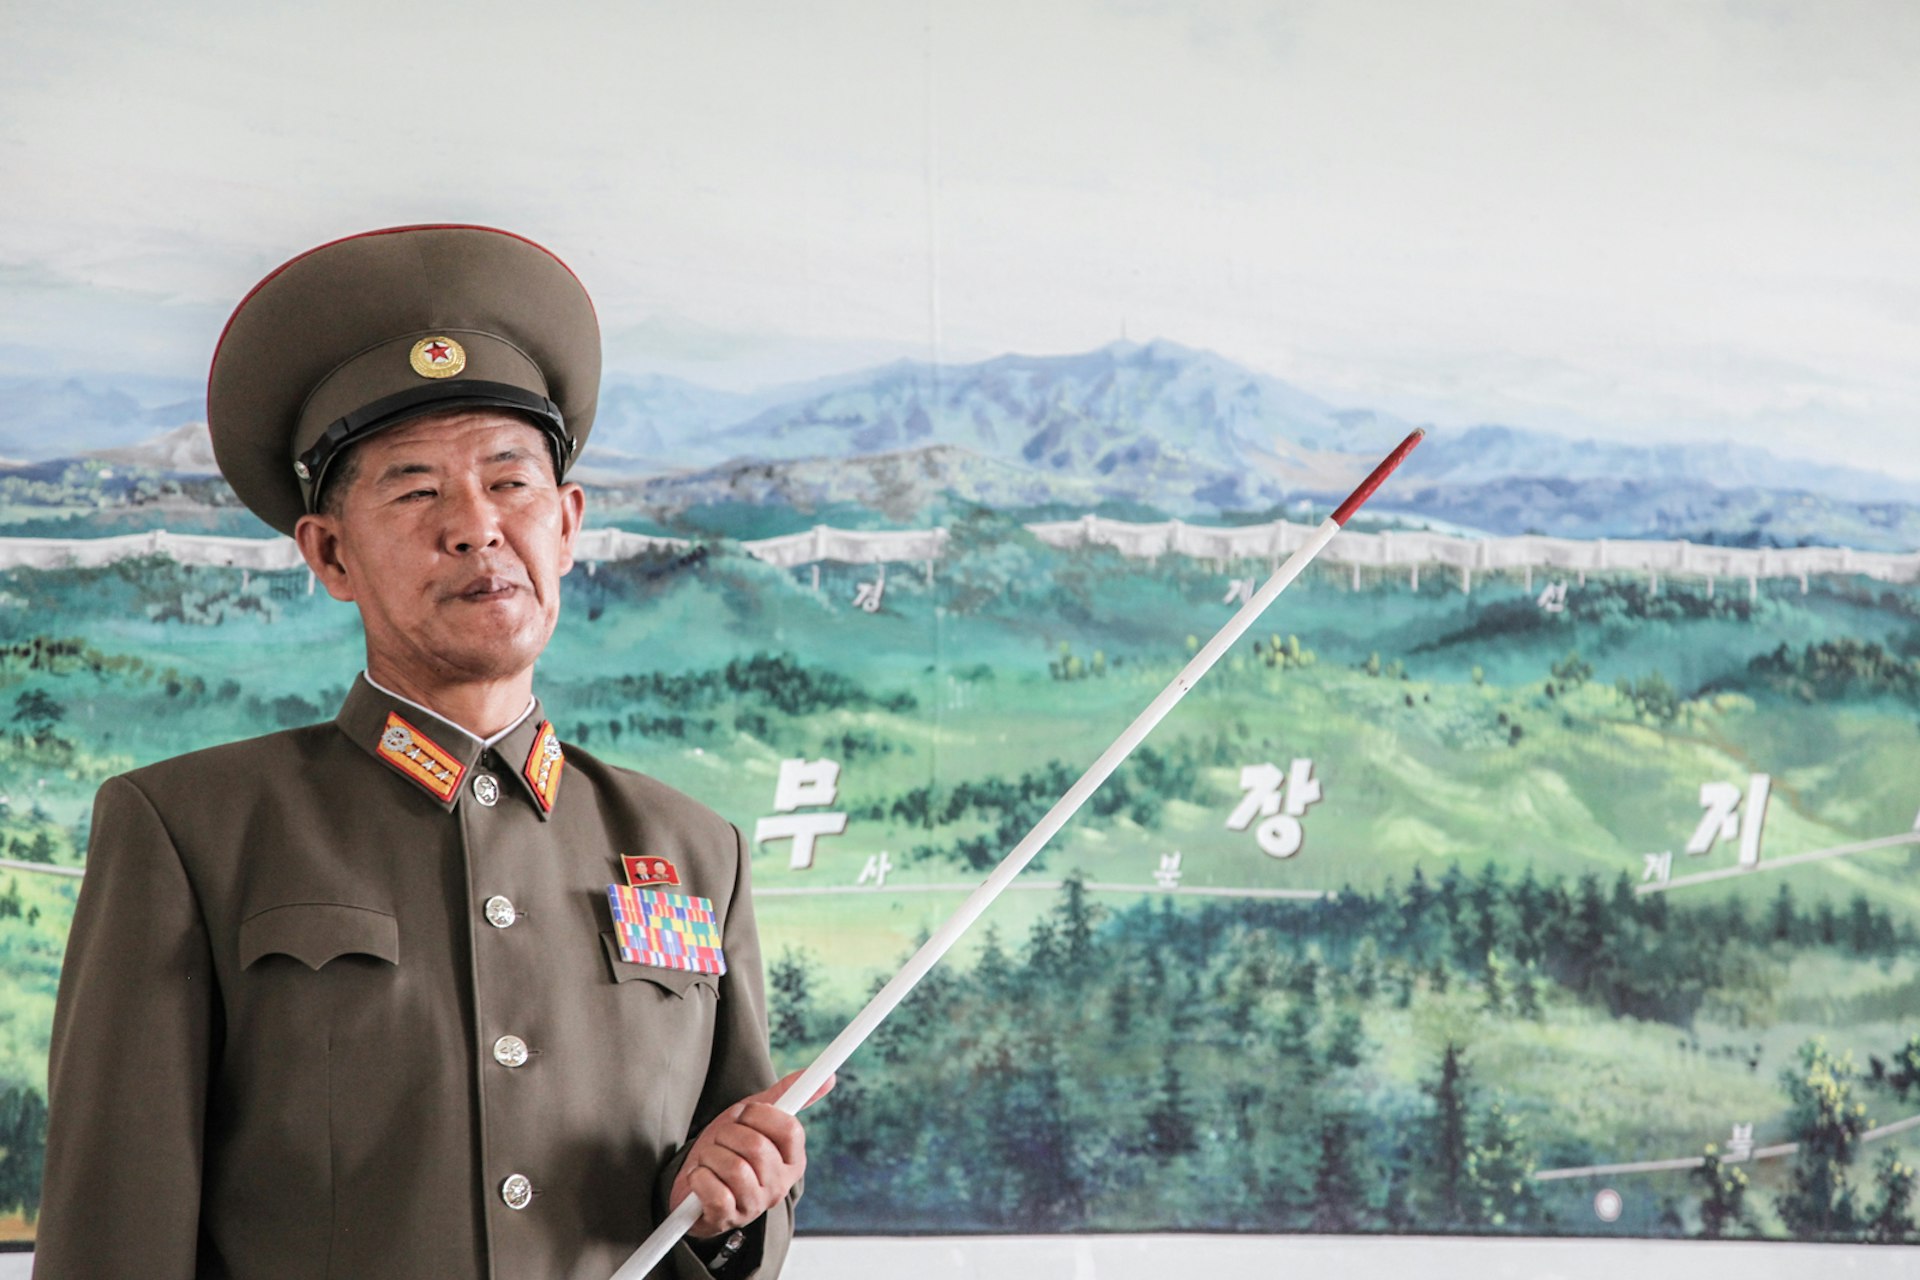 A DPRK officer illustrating a map of the DMZ in Kaesong.